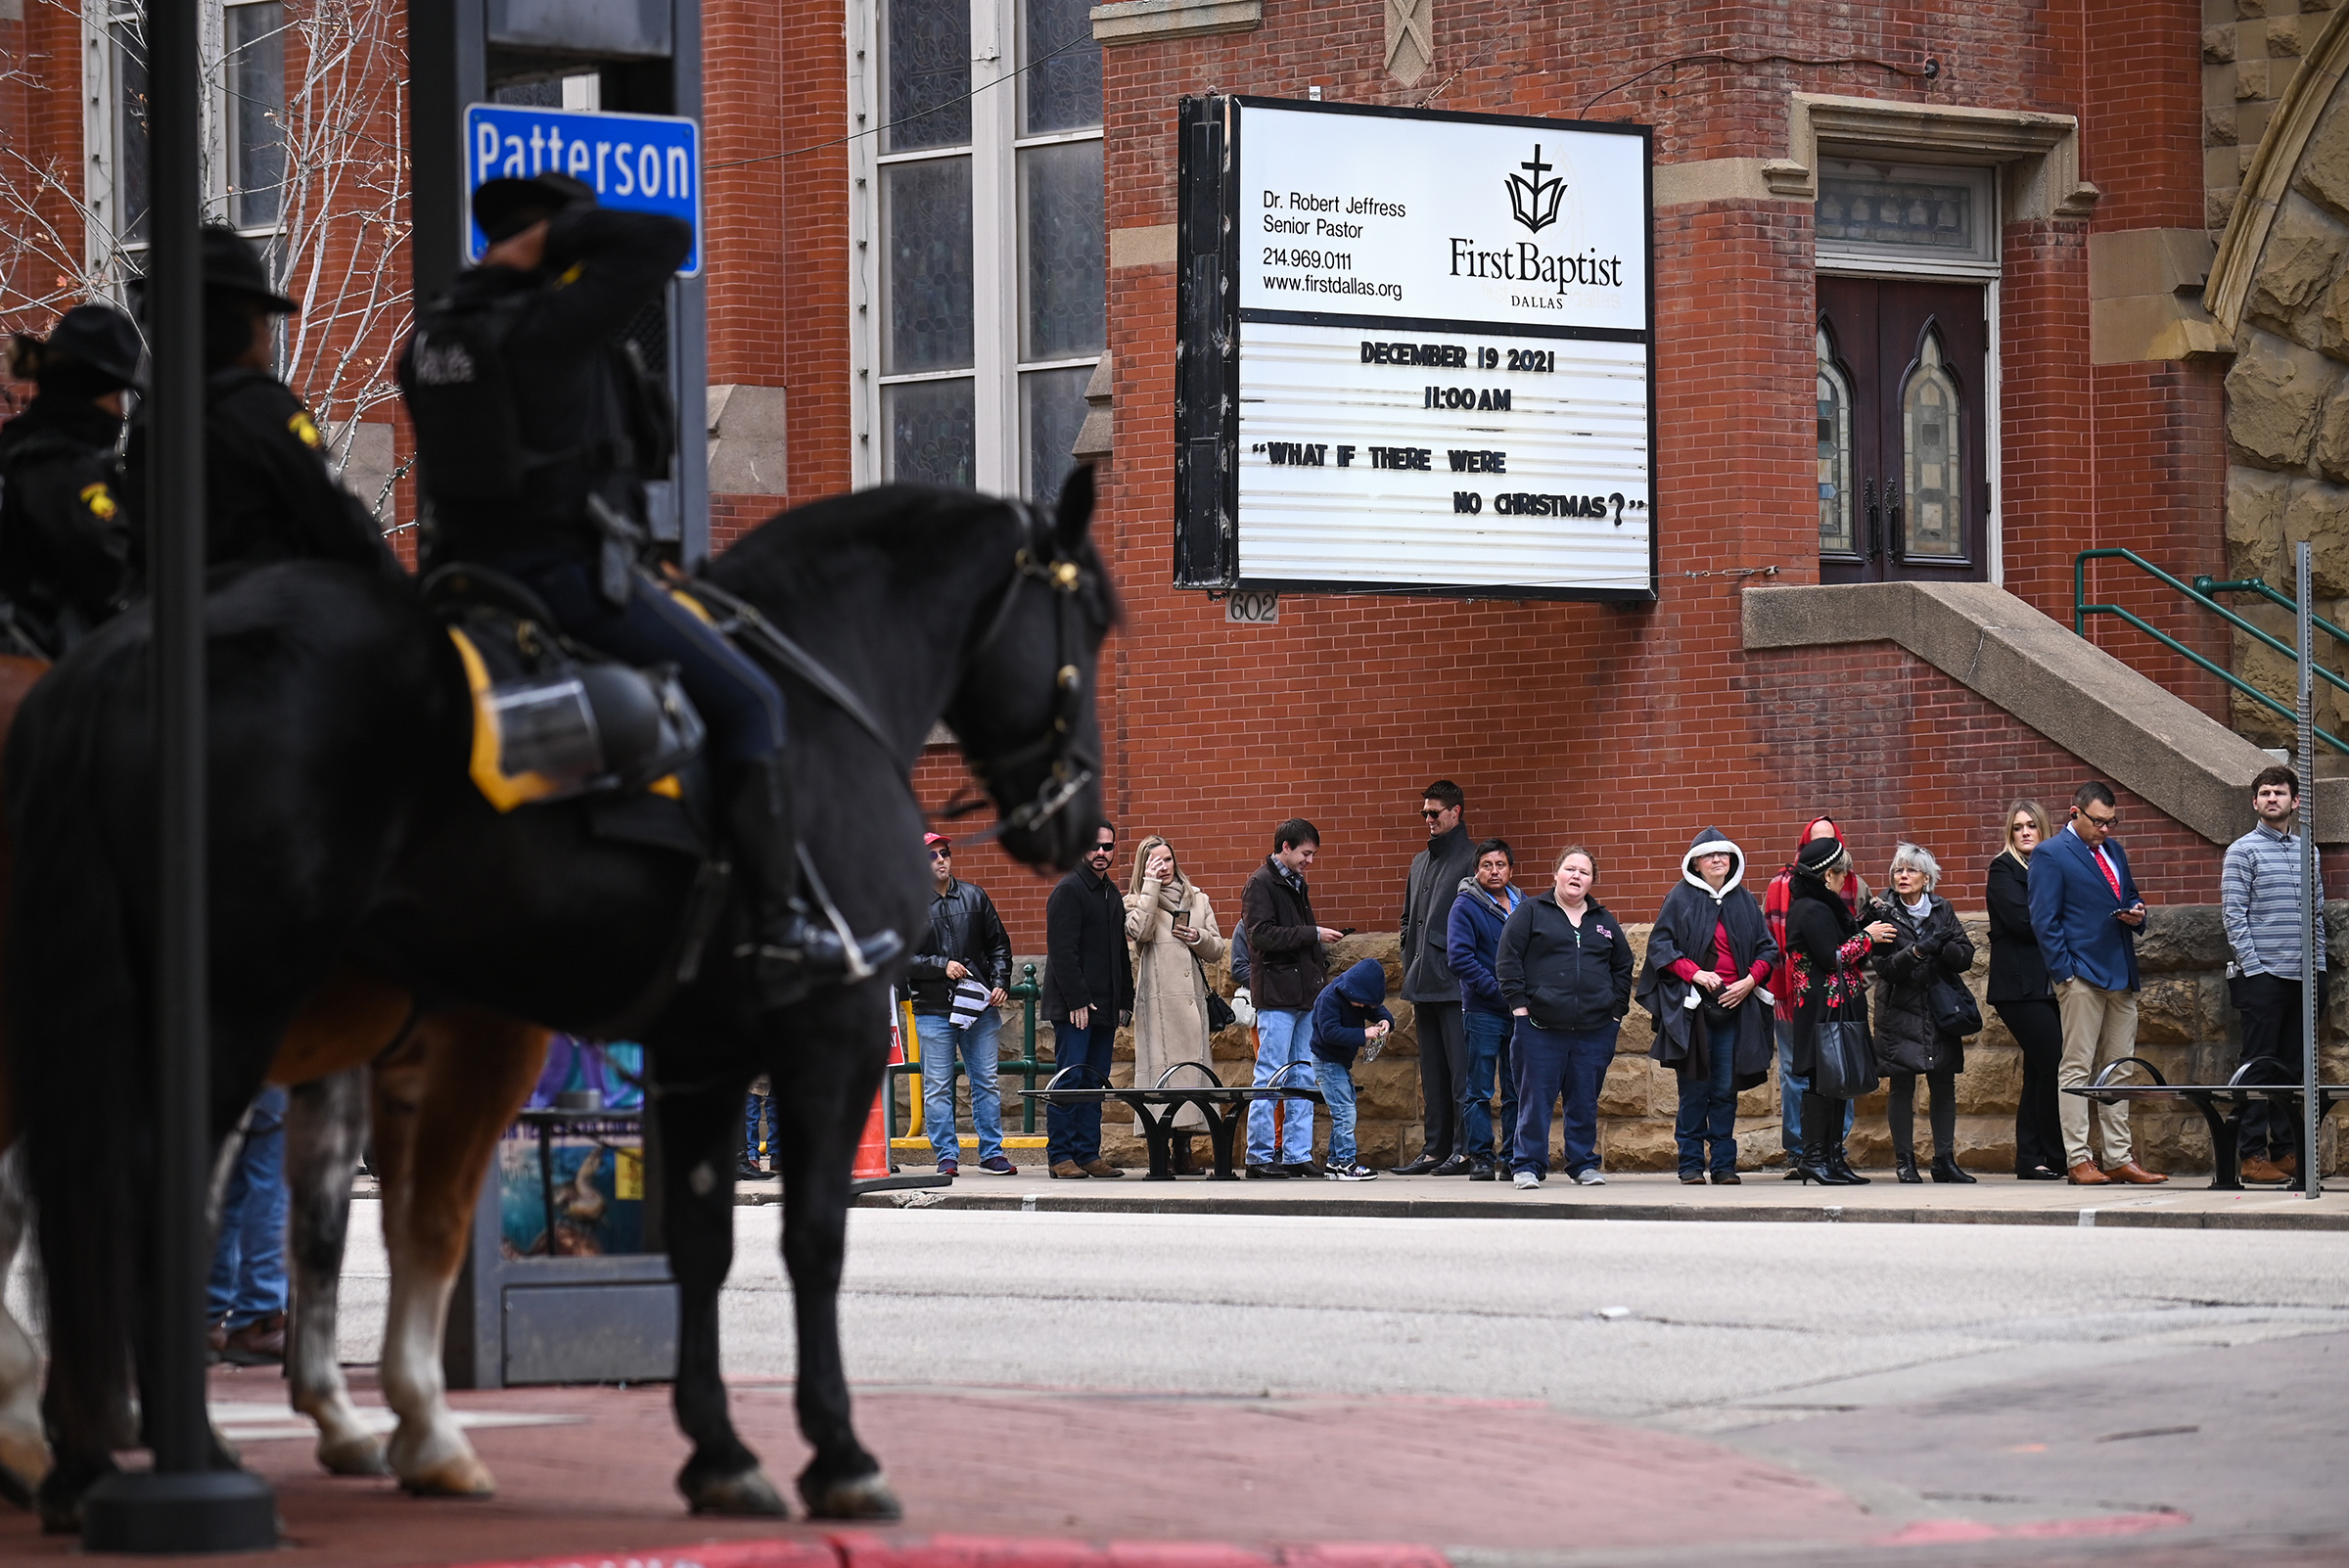 A Dallas Police Mounted Unit stand outside of the old First Dallas Baptist church as Trump supporters and members wait in line for Sunday morning service with former President Donald Trump, on Sunday, Dec. 19, 2021 in downtown Dallas. (Ben Torres)